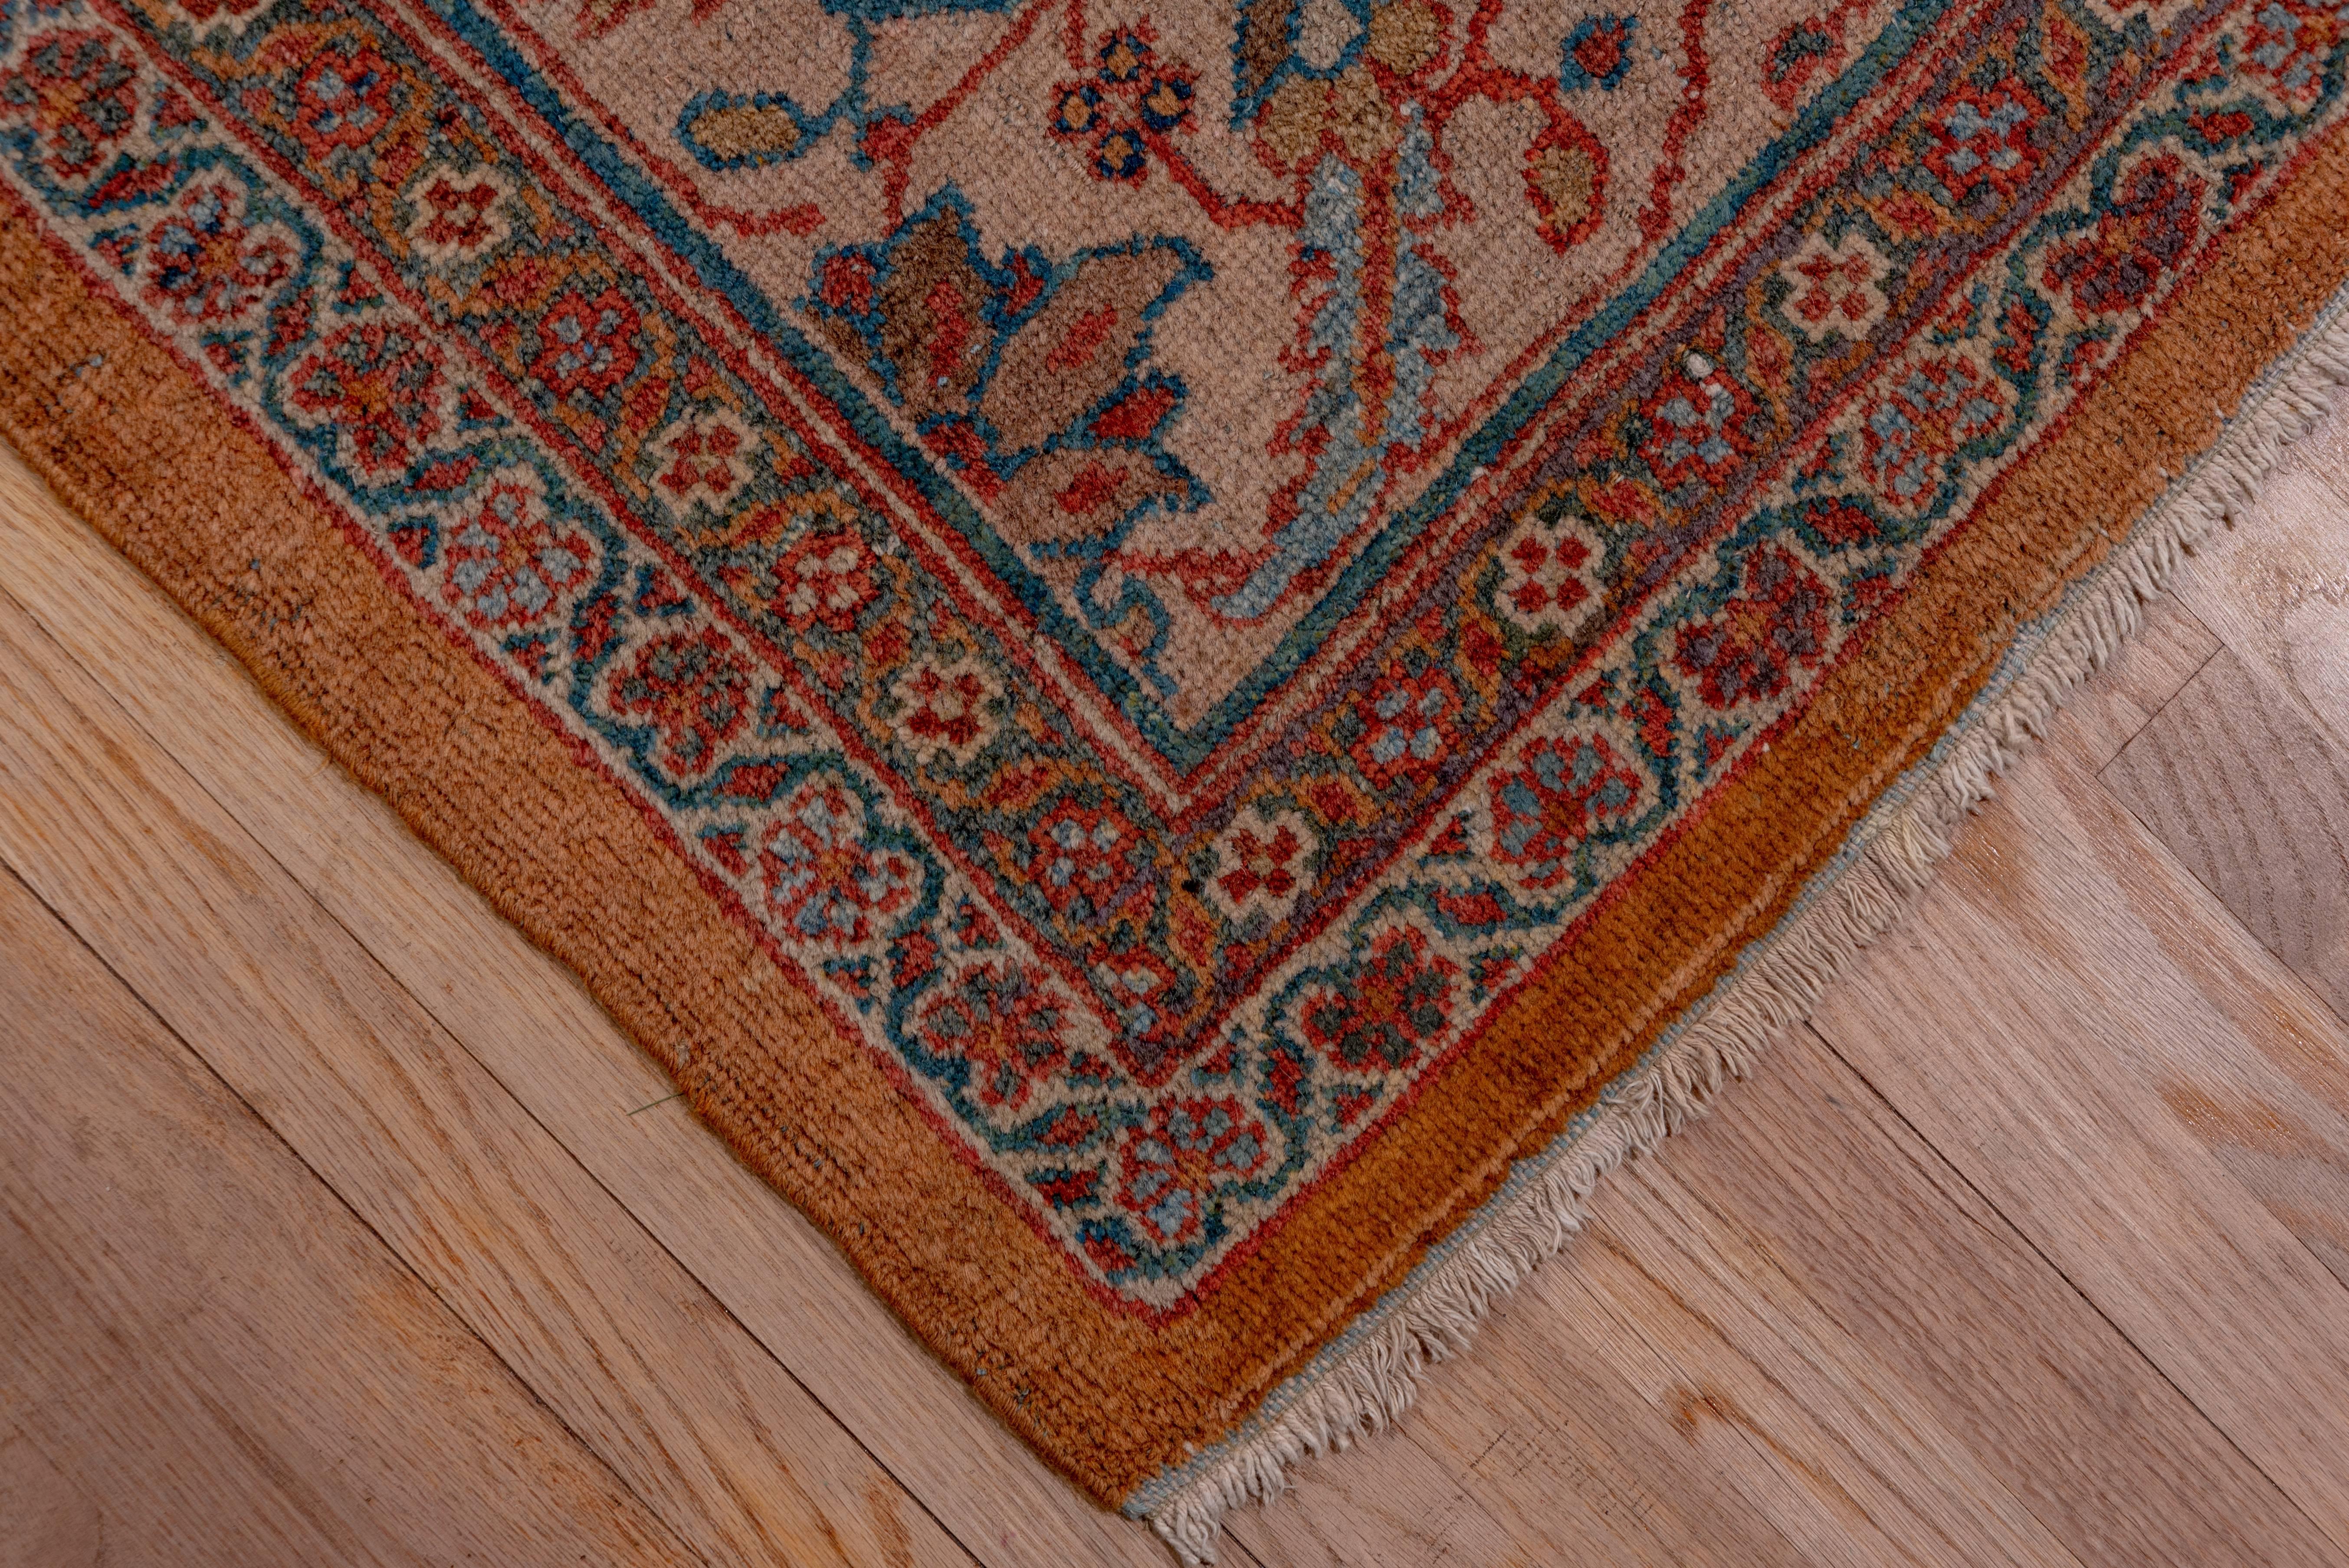 Hand-Knotted Antique Sultanabad Carpet, circa 1900s